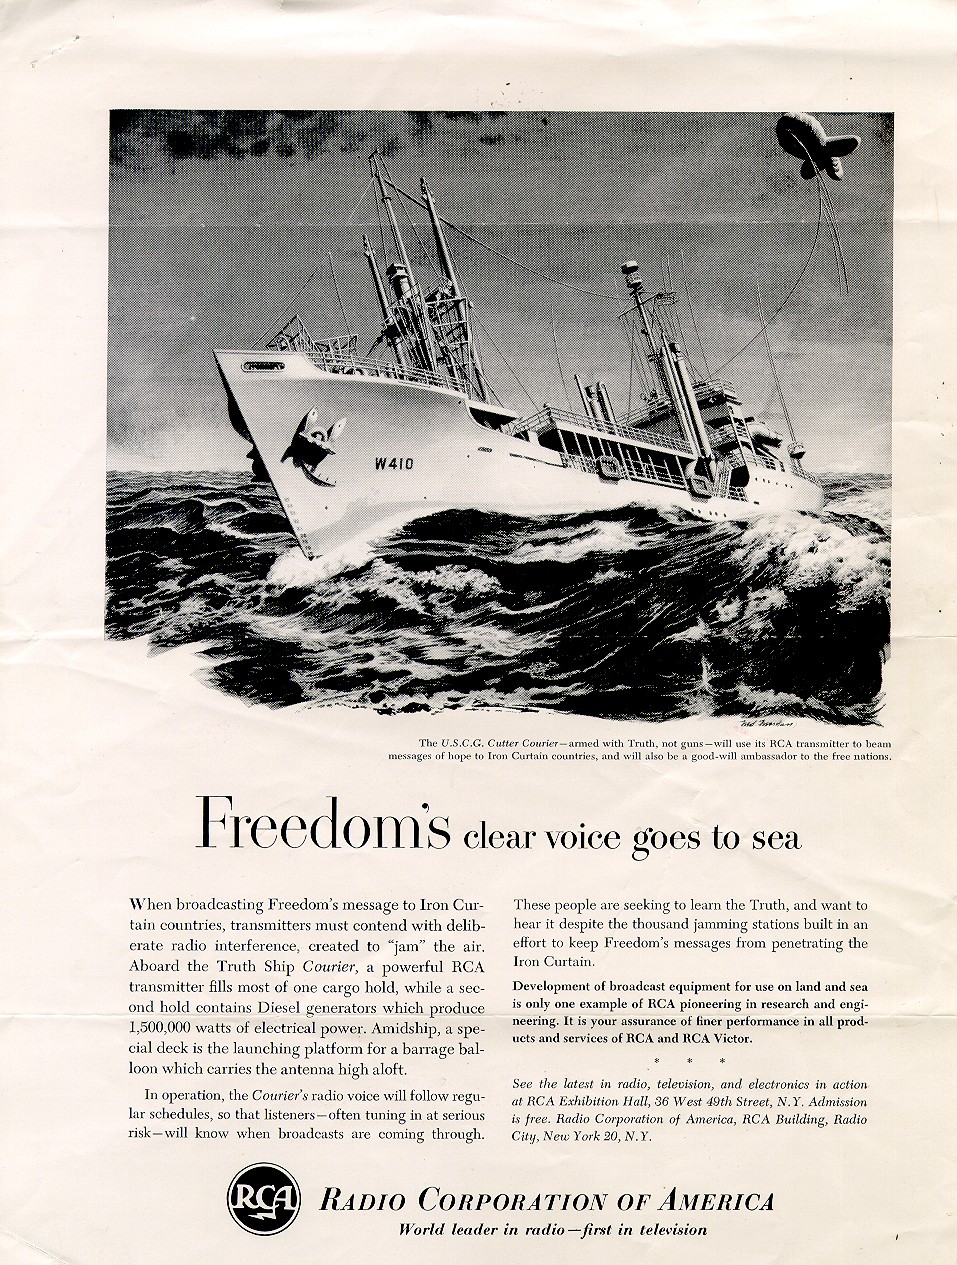 A Radio Corporation of American (RCA) advertisement featuring an artist’s rendering of Courier. Typically, Courier rode at anchor in calm waters! (The crew of the Coast Guard Cutter Courier, as collected by the Coast Guard Cutter Courier/VOA Association)